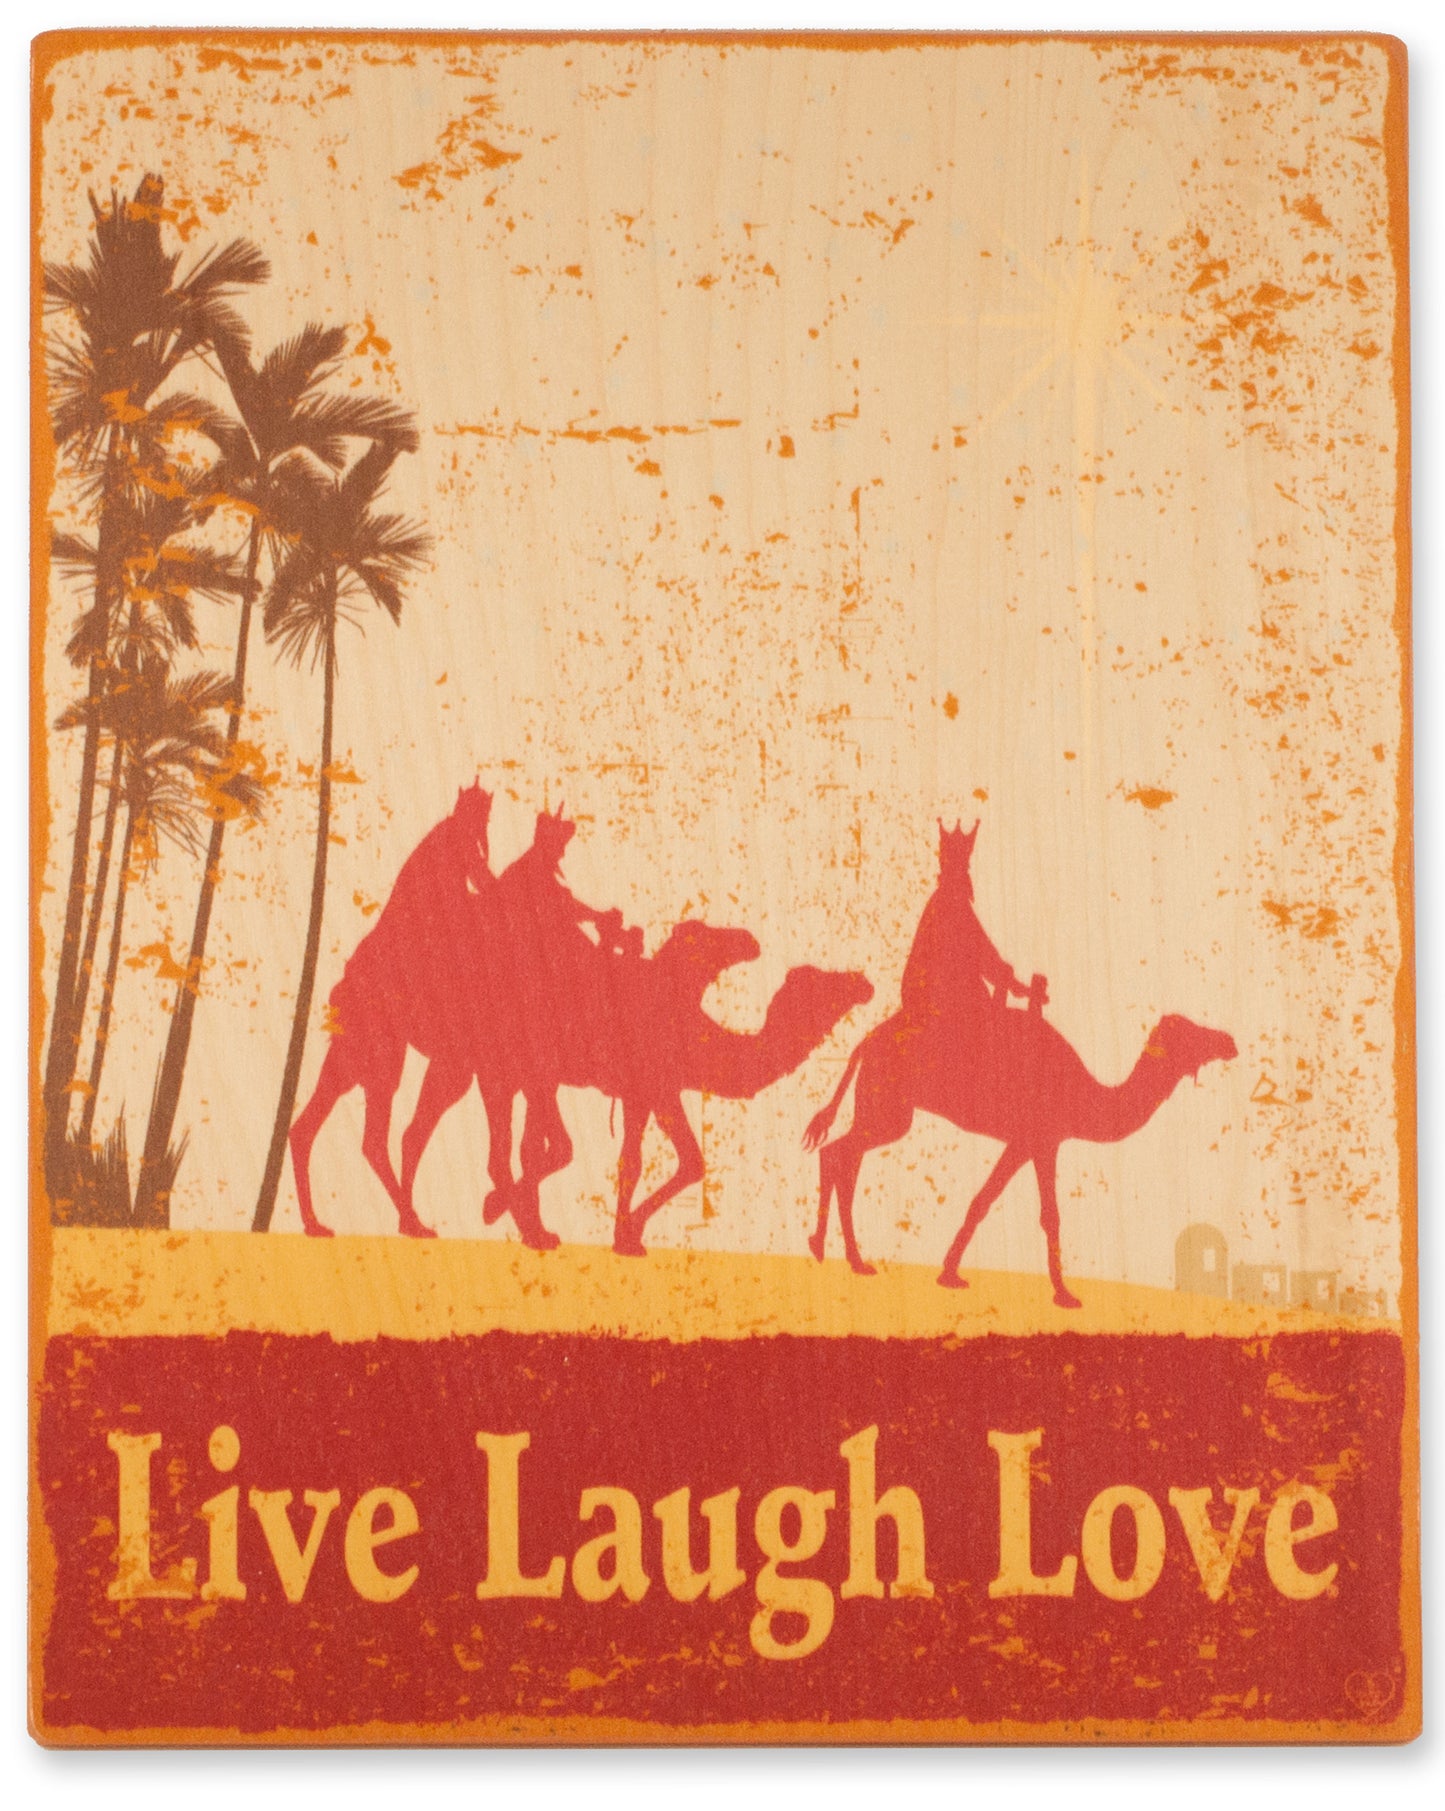 Three Kings of Christmas Vintage Wood Wall Sign Plaque by Live Laugh Love®